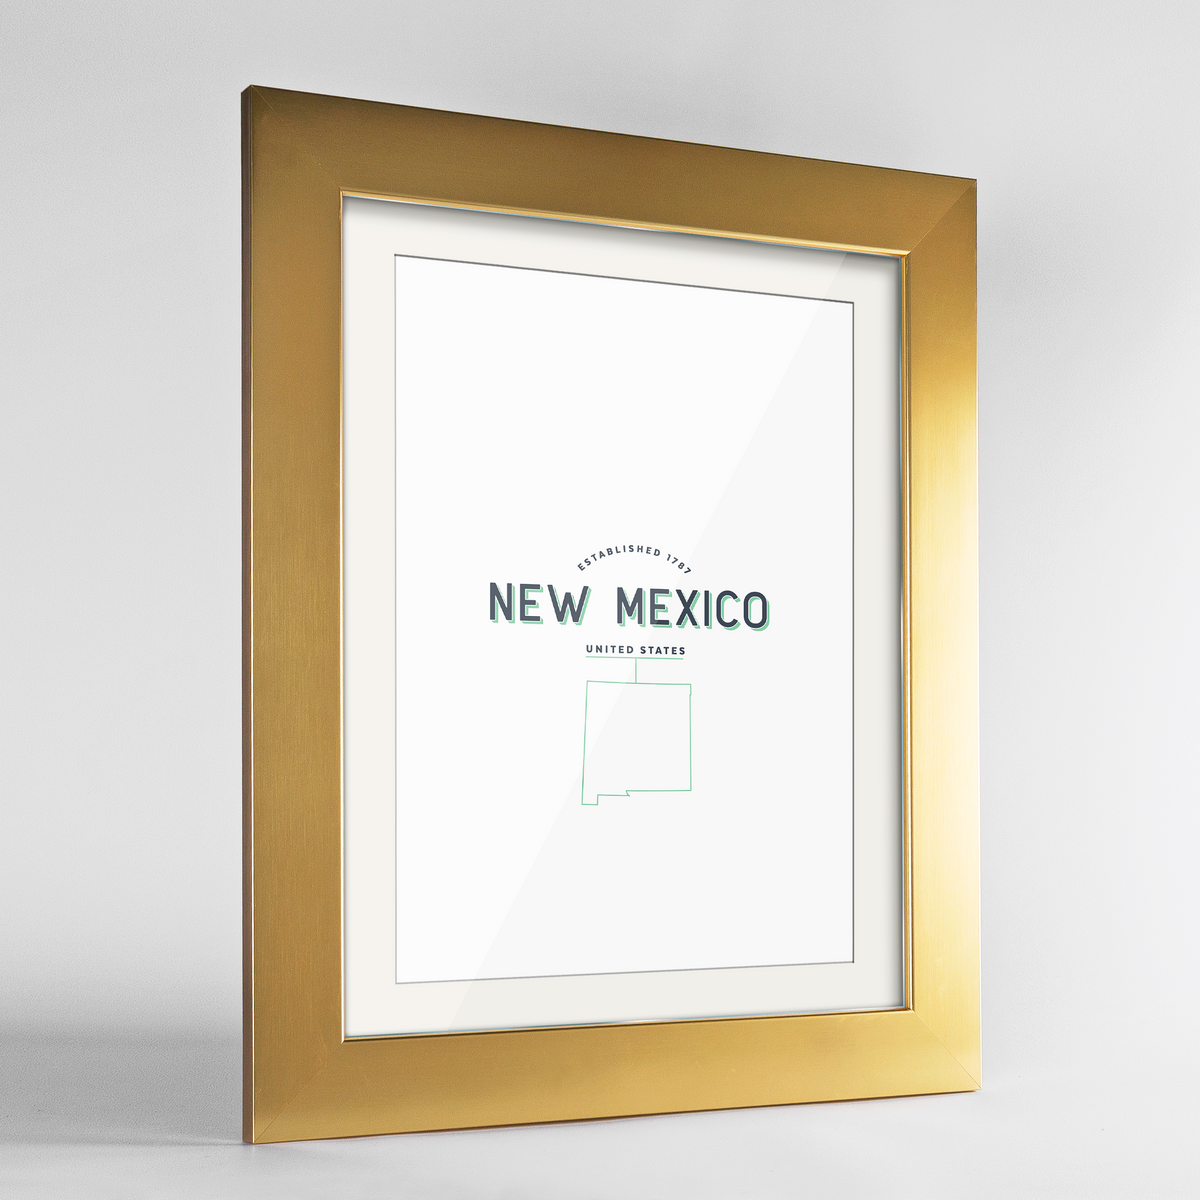 New Mexico Word Art Frame Print - State Line